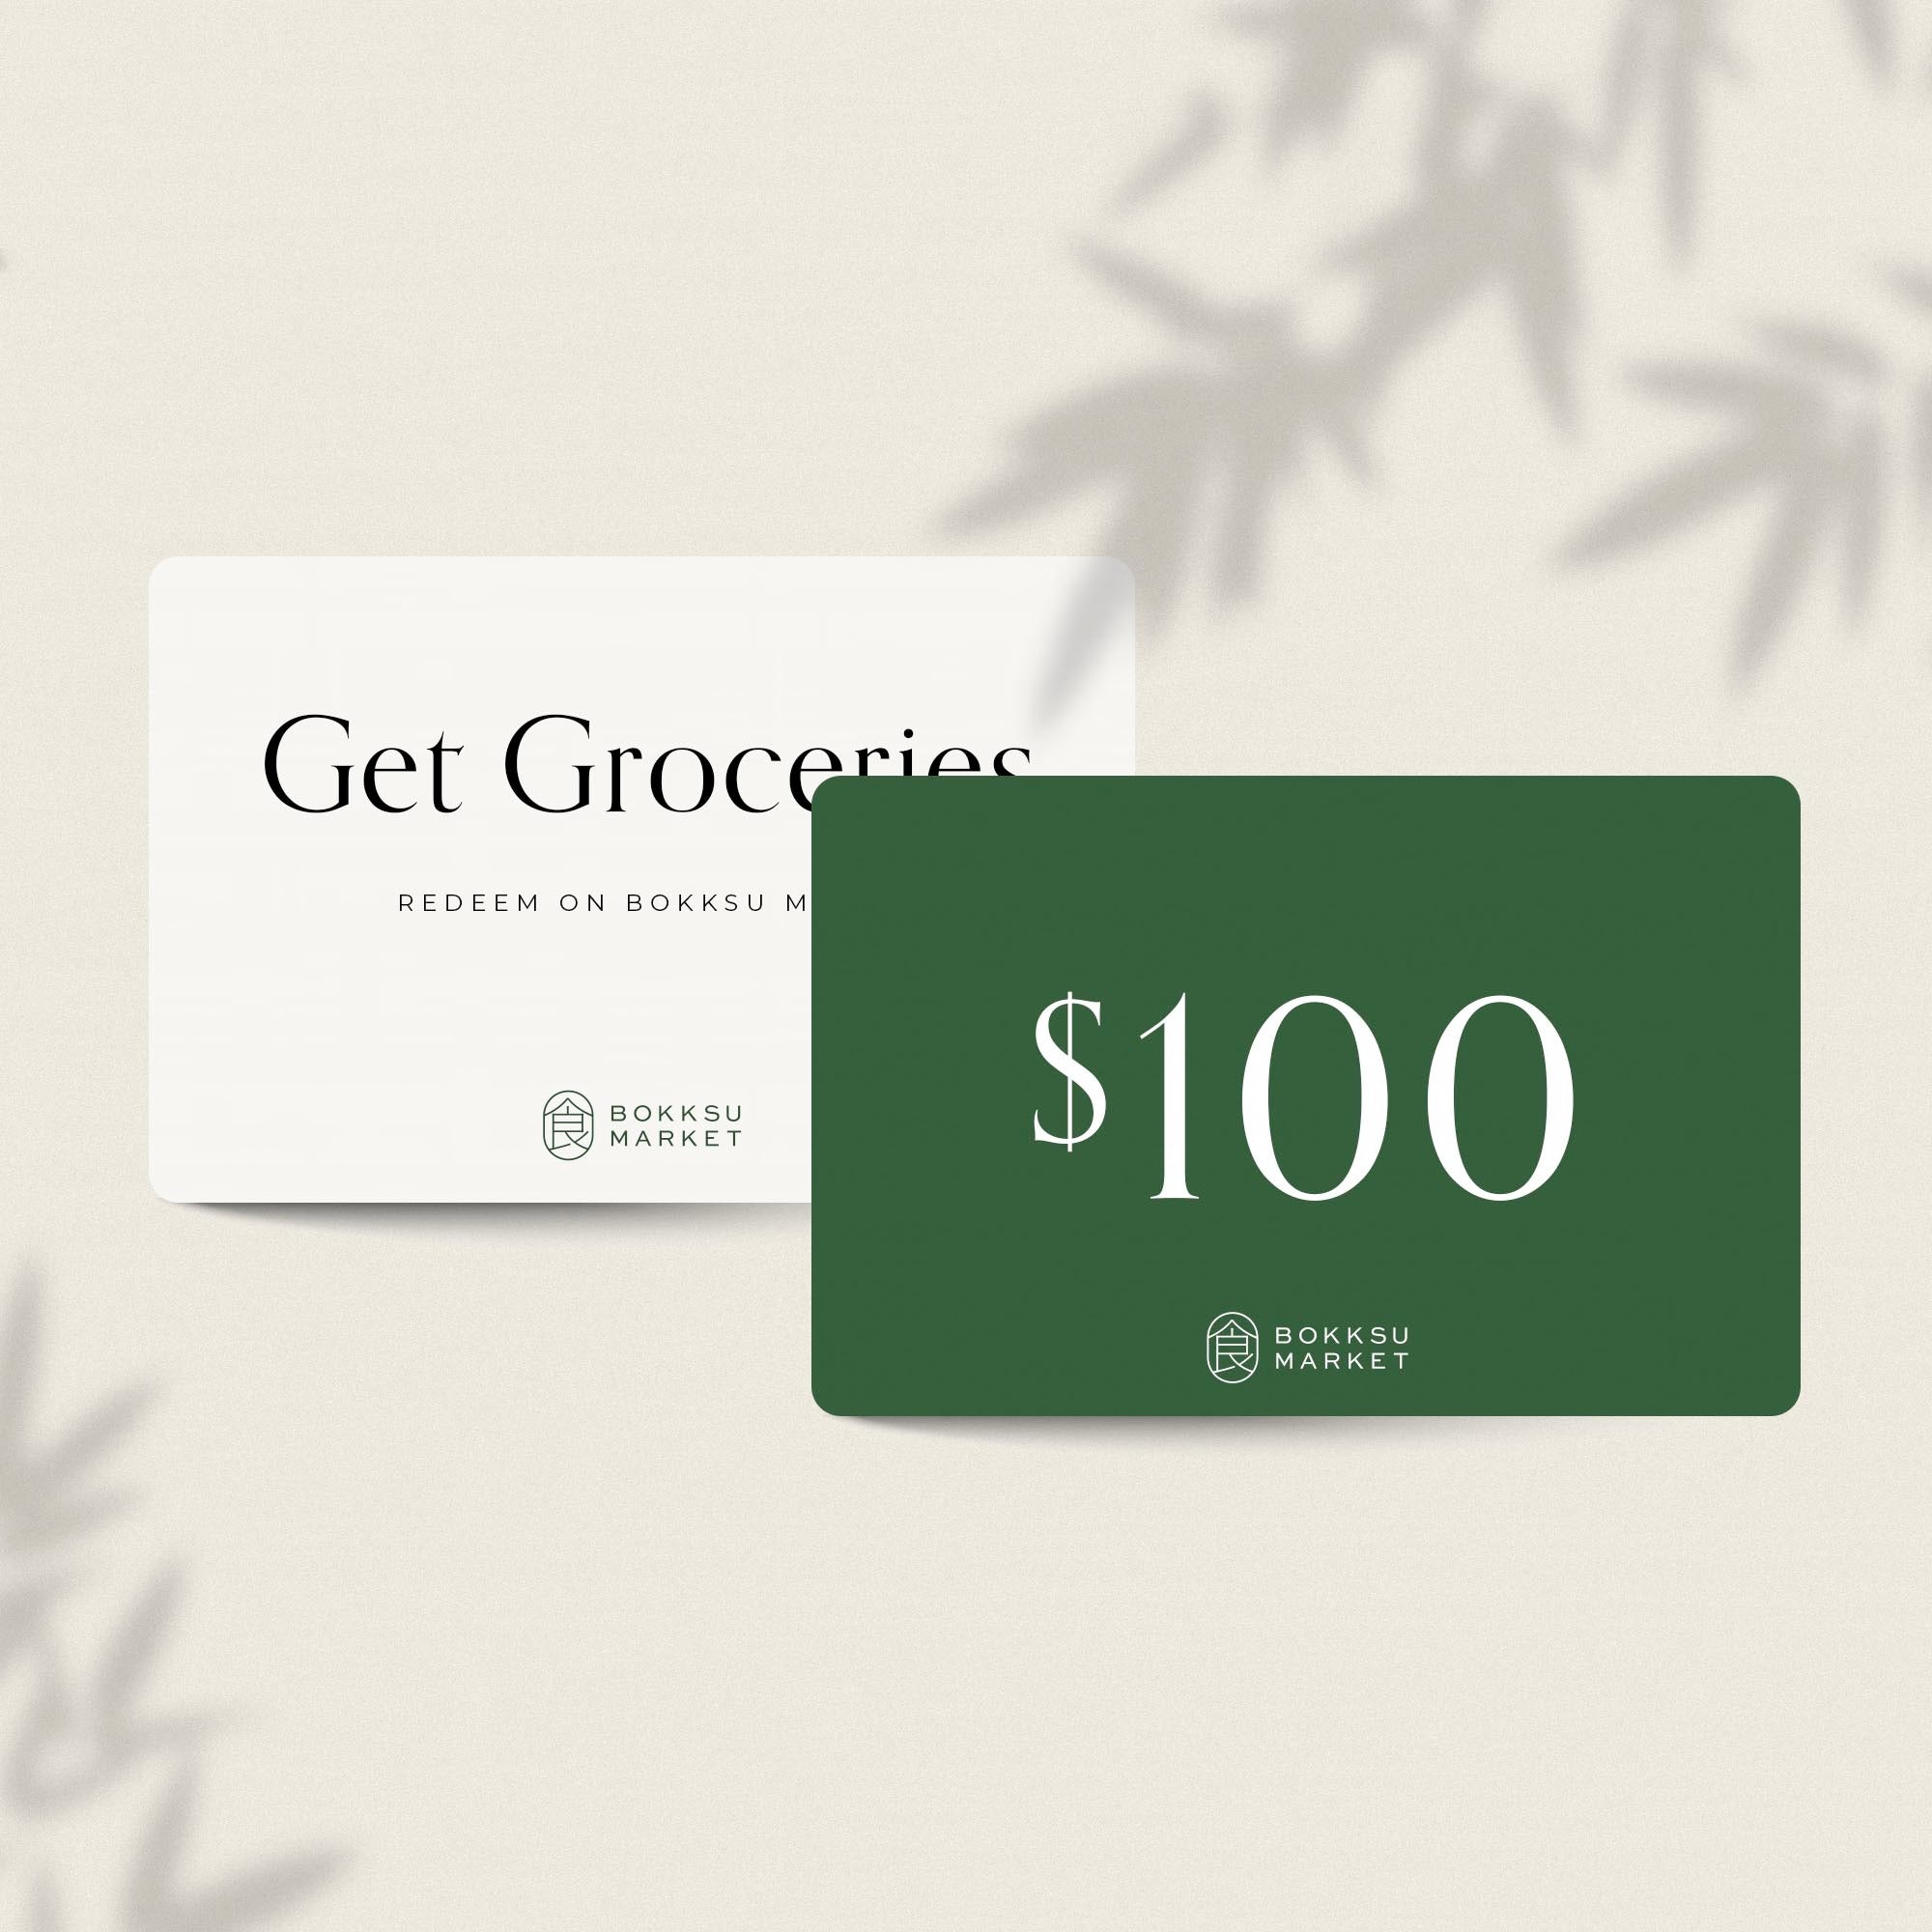 Target gift card discount 2020: Save on store gift cards Dec. 5-6